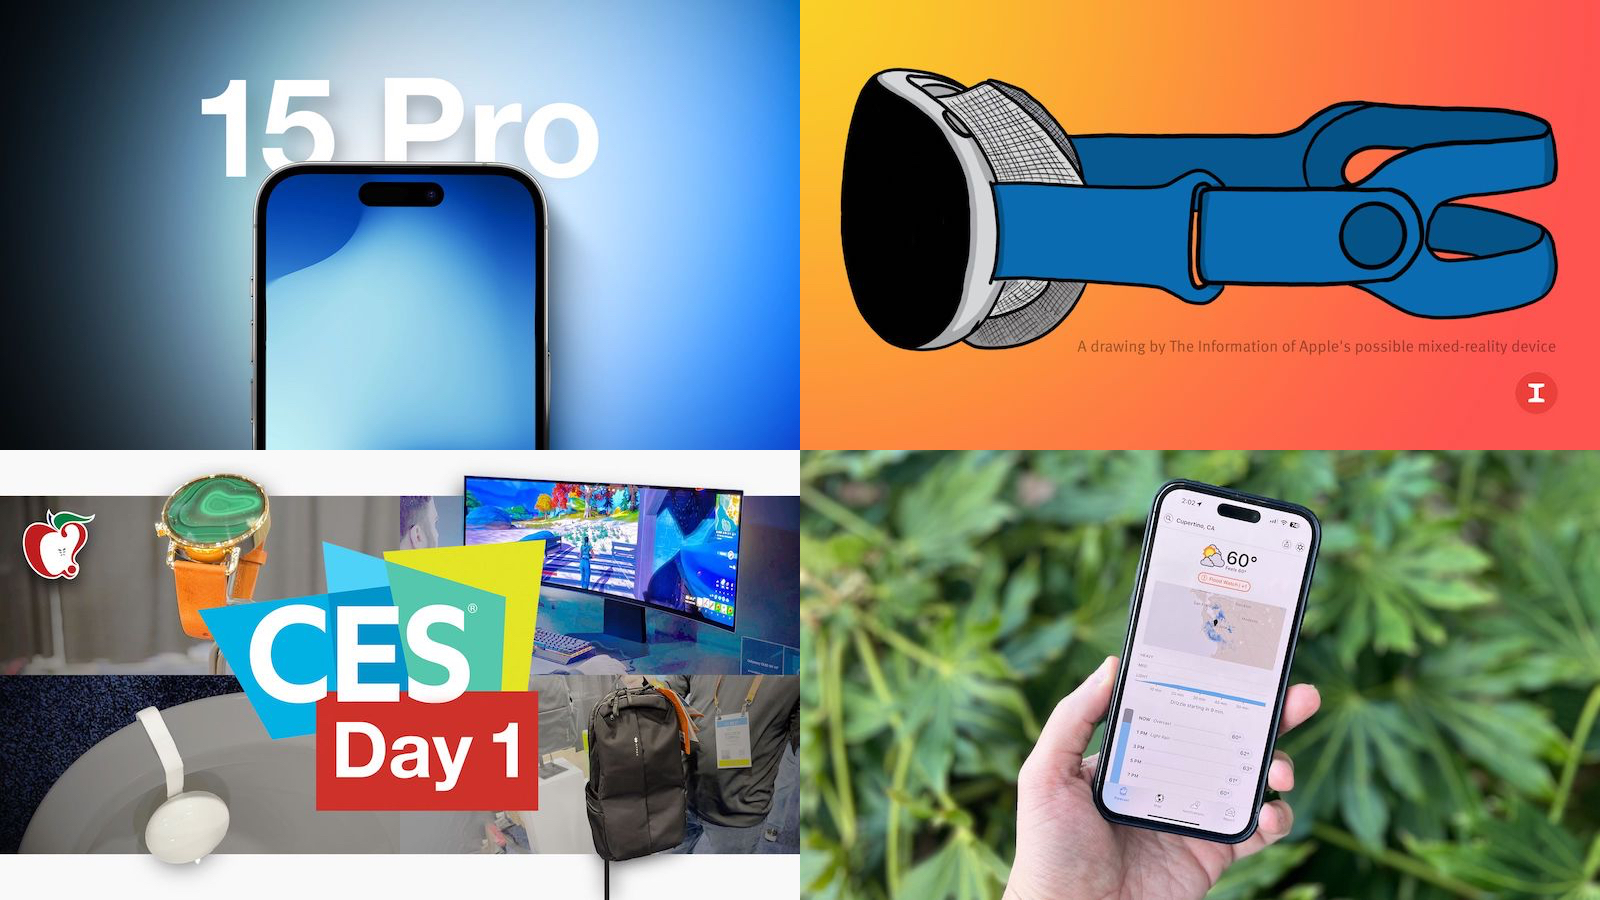 Top Stories: iPhone 15 Pro and Headset Rumors, CES 2023, Dark Sky Shutdown, and More